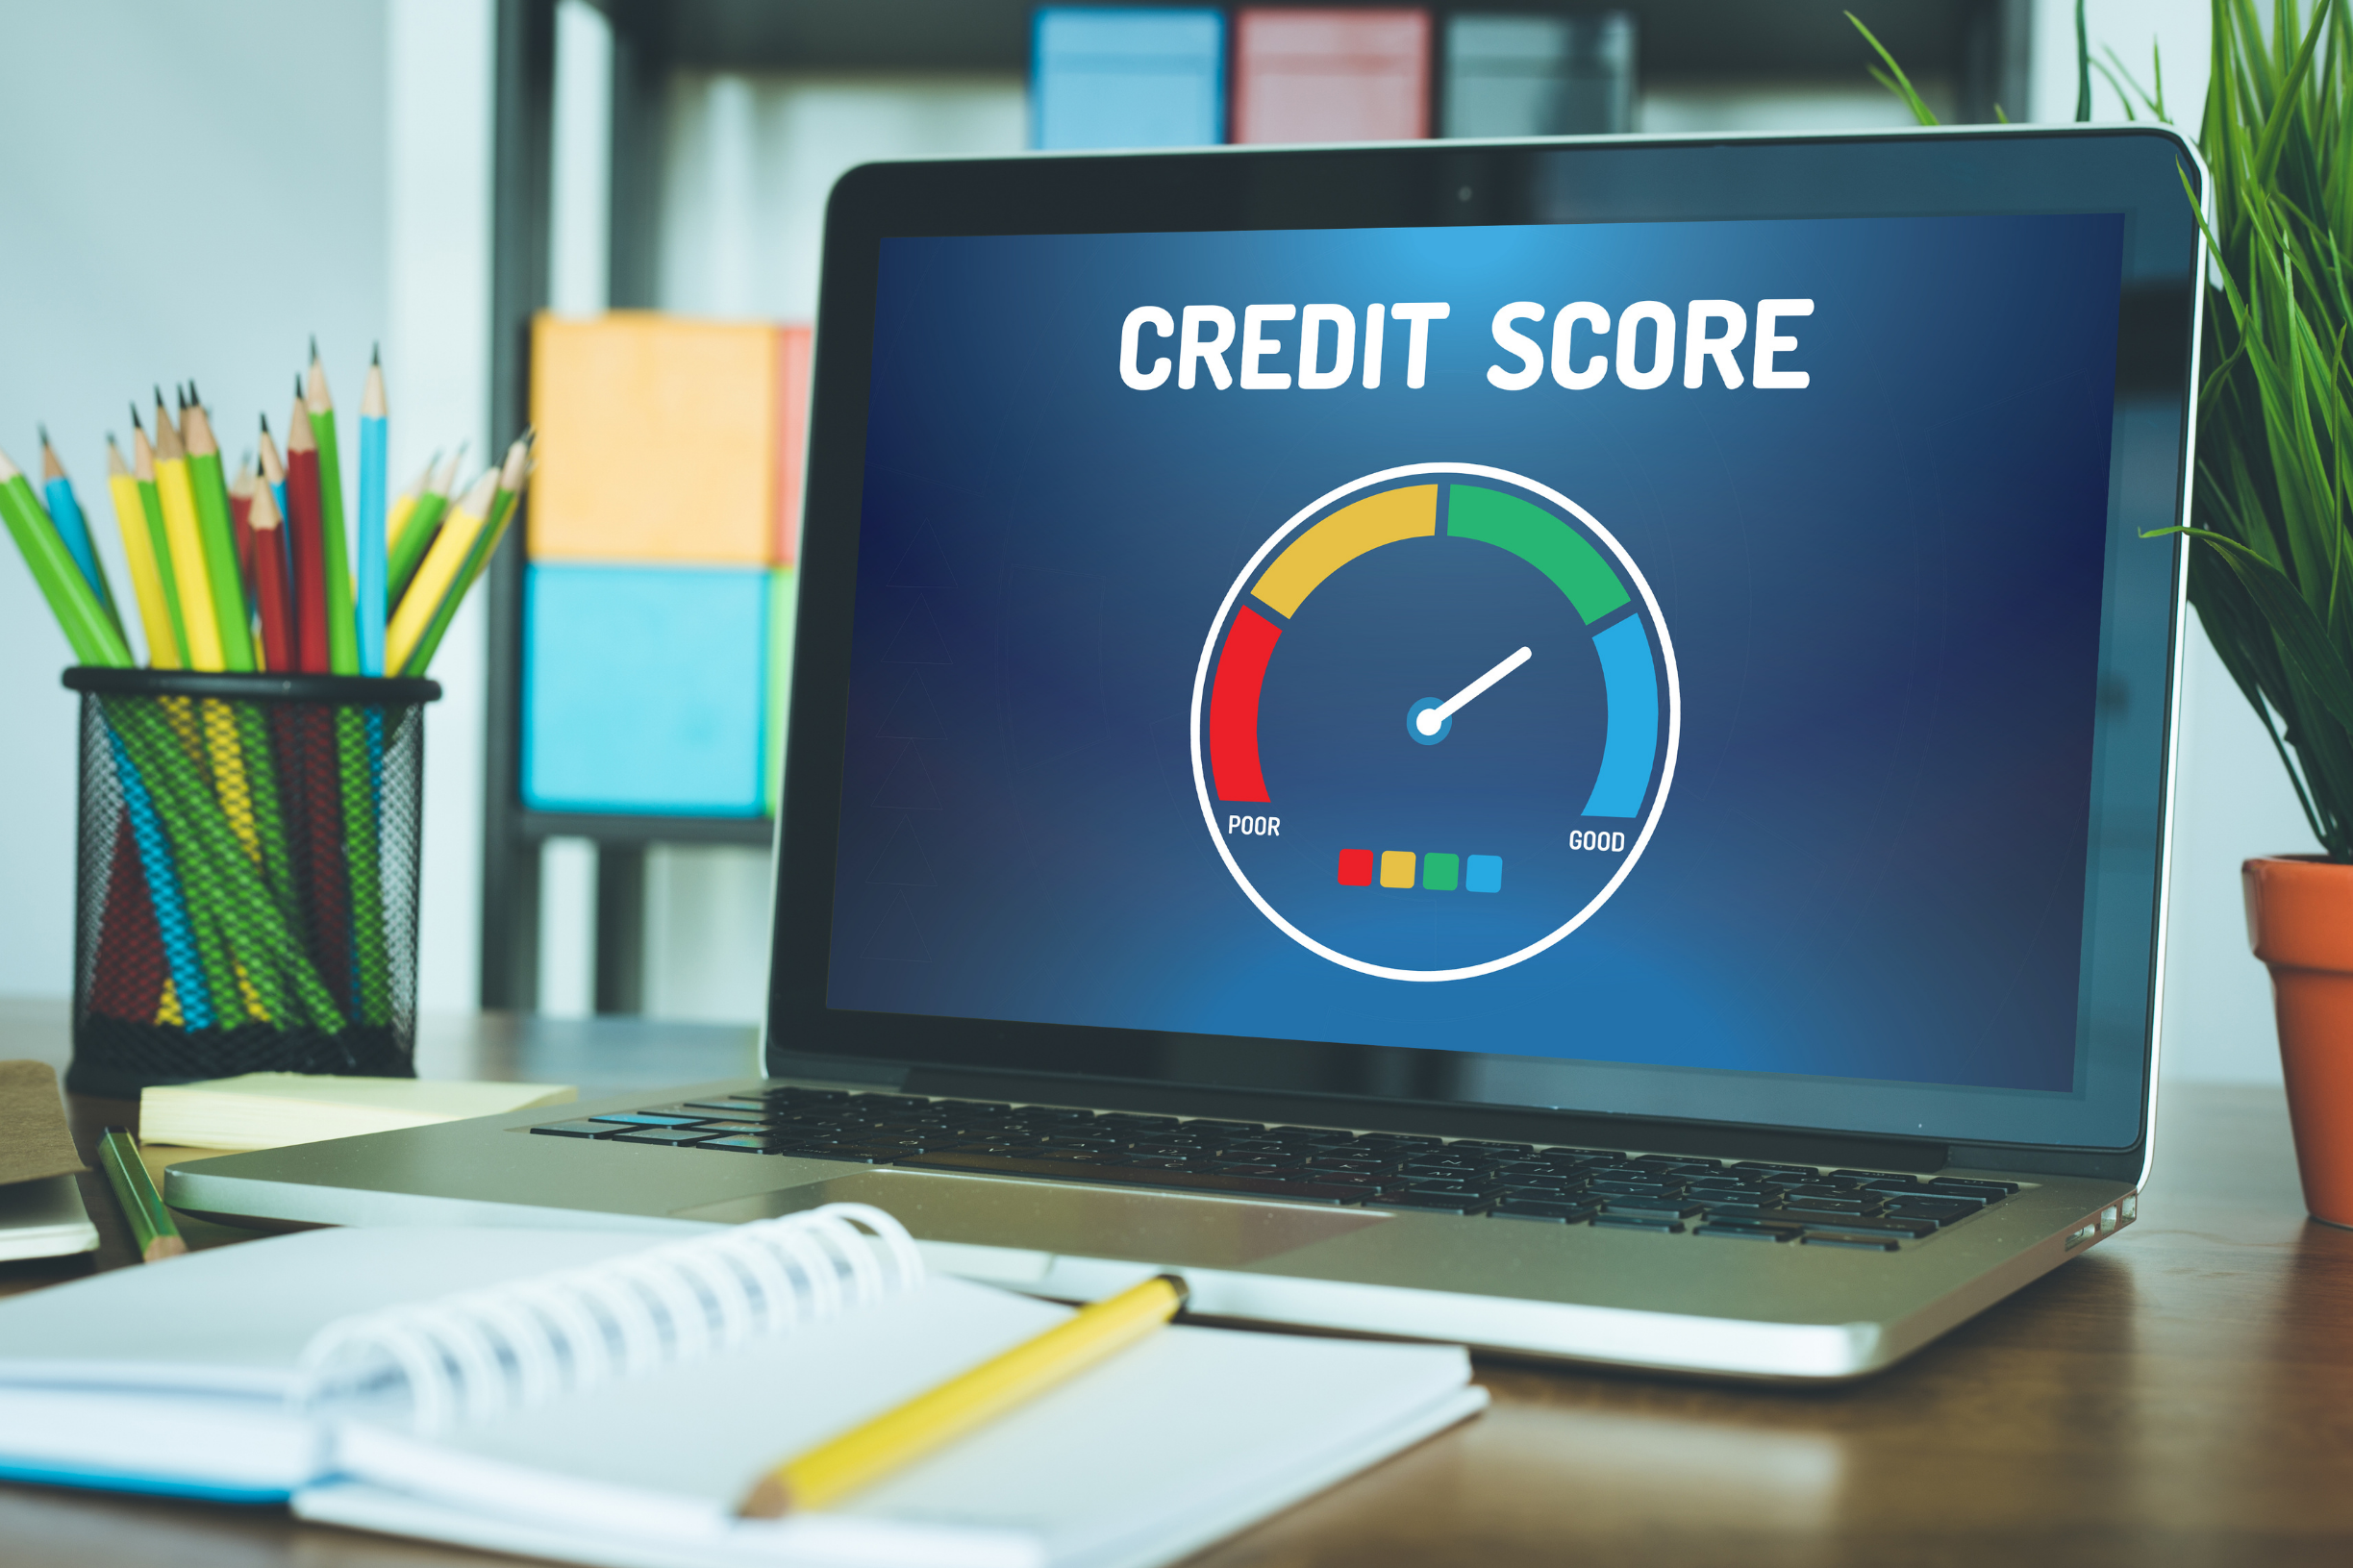 FICO and Vantage Scores: What’s the Difference?